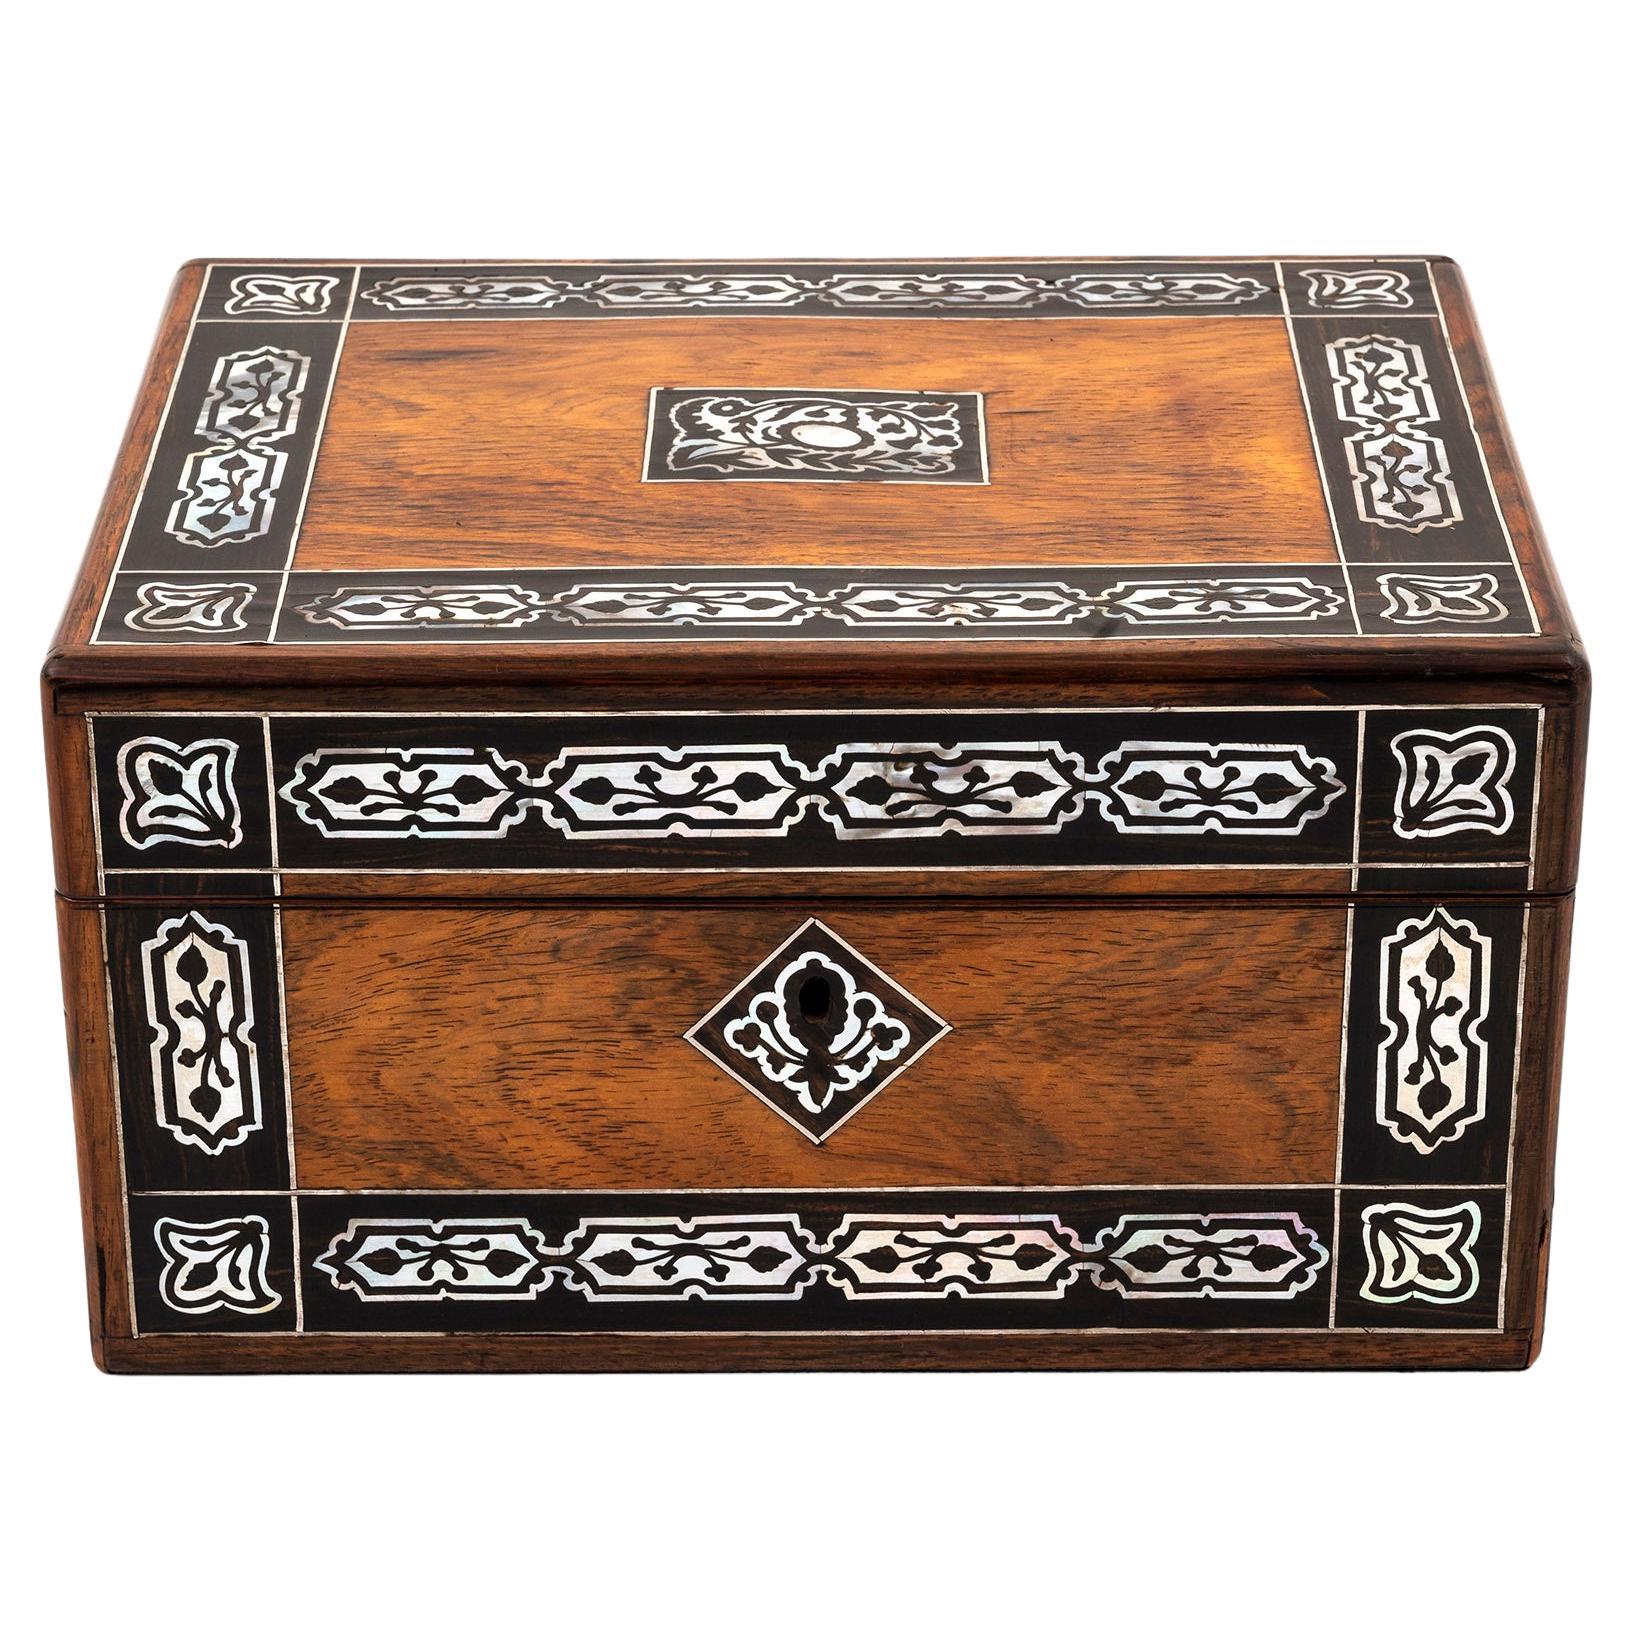 Antique Rosewood Jewellery Box with Symmetrical Mother of Pearl Inlay